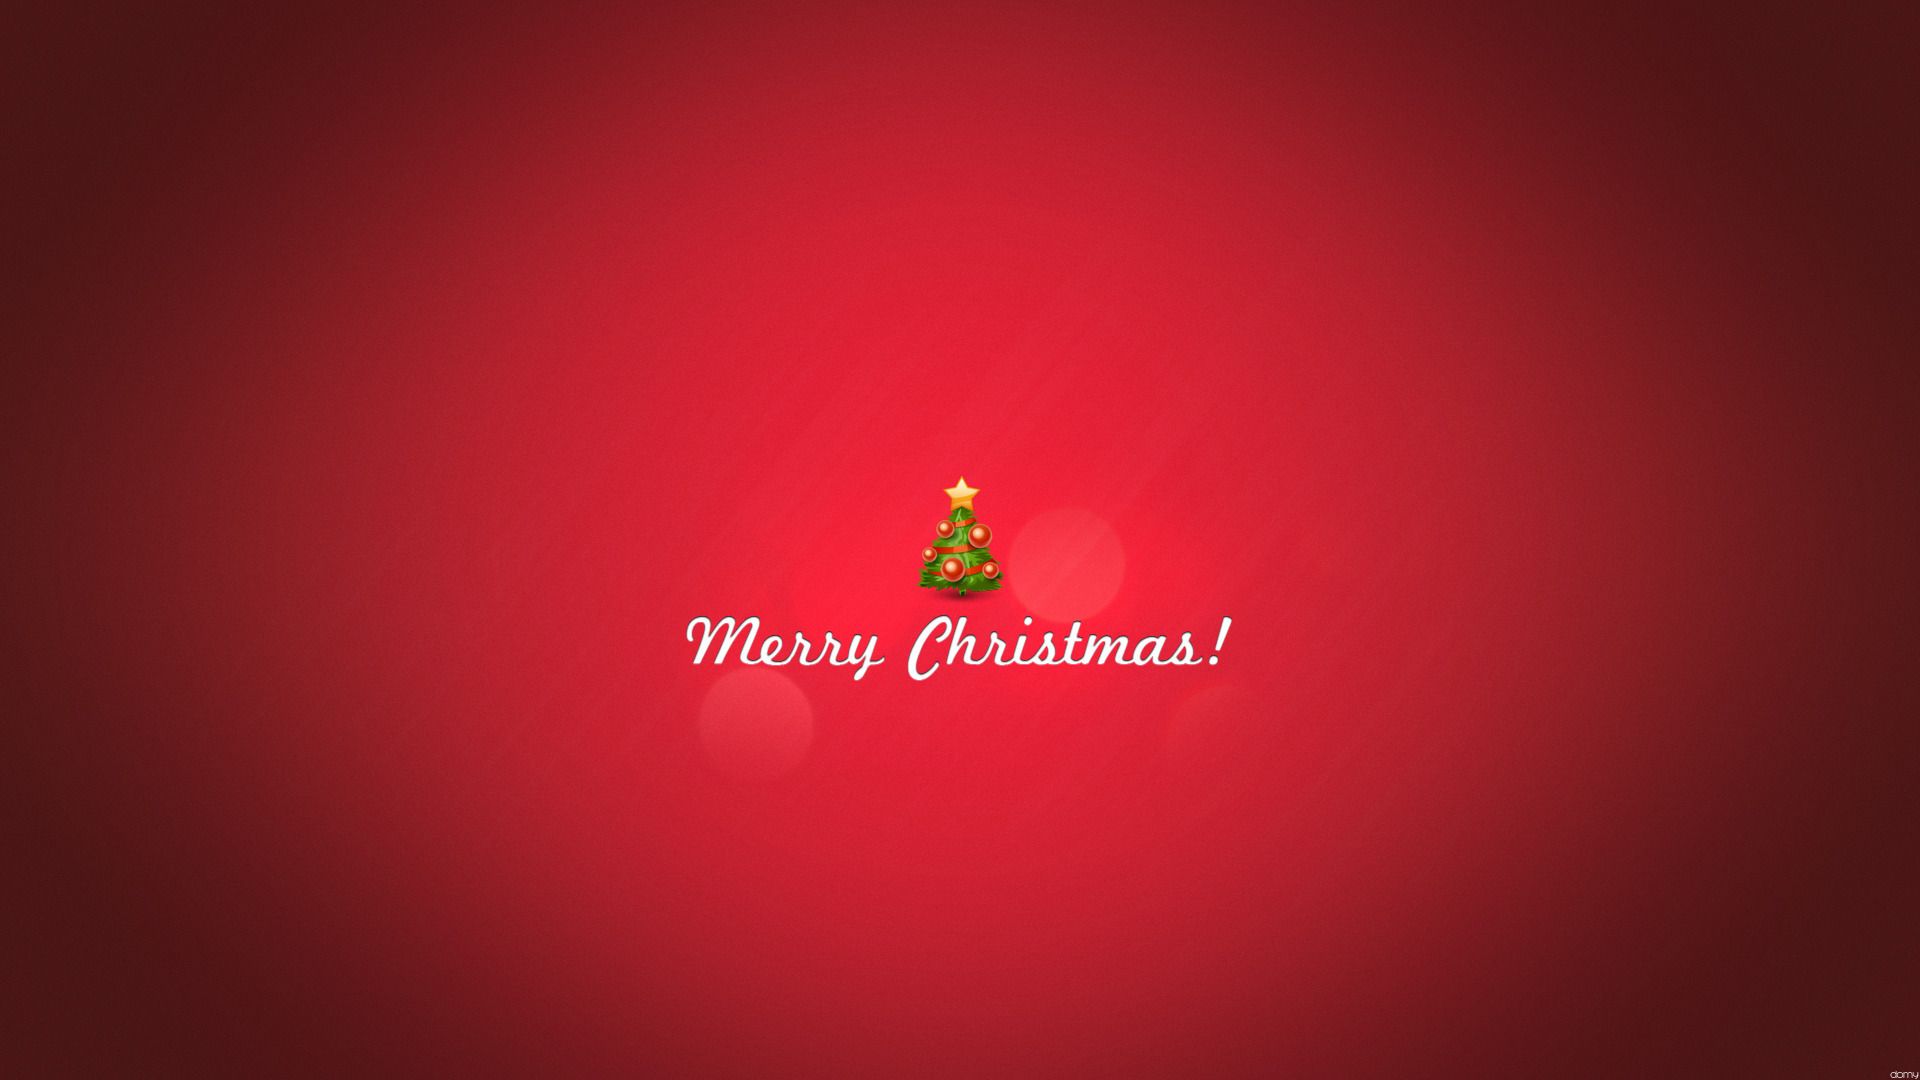 Minimalist Christmas Wallpaper For Desktop And iPhone